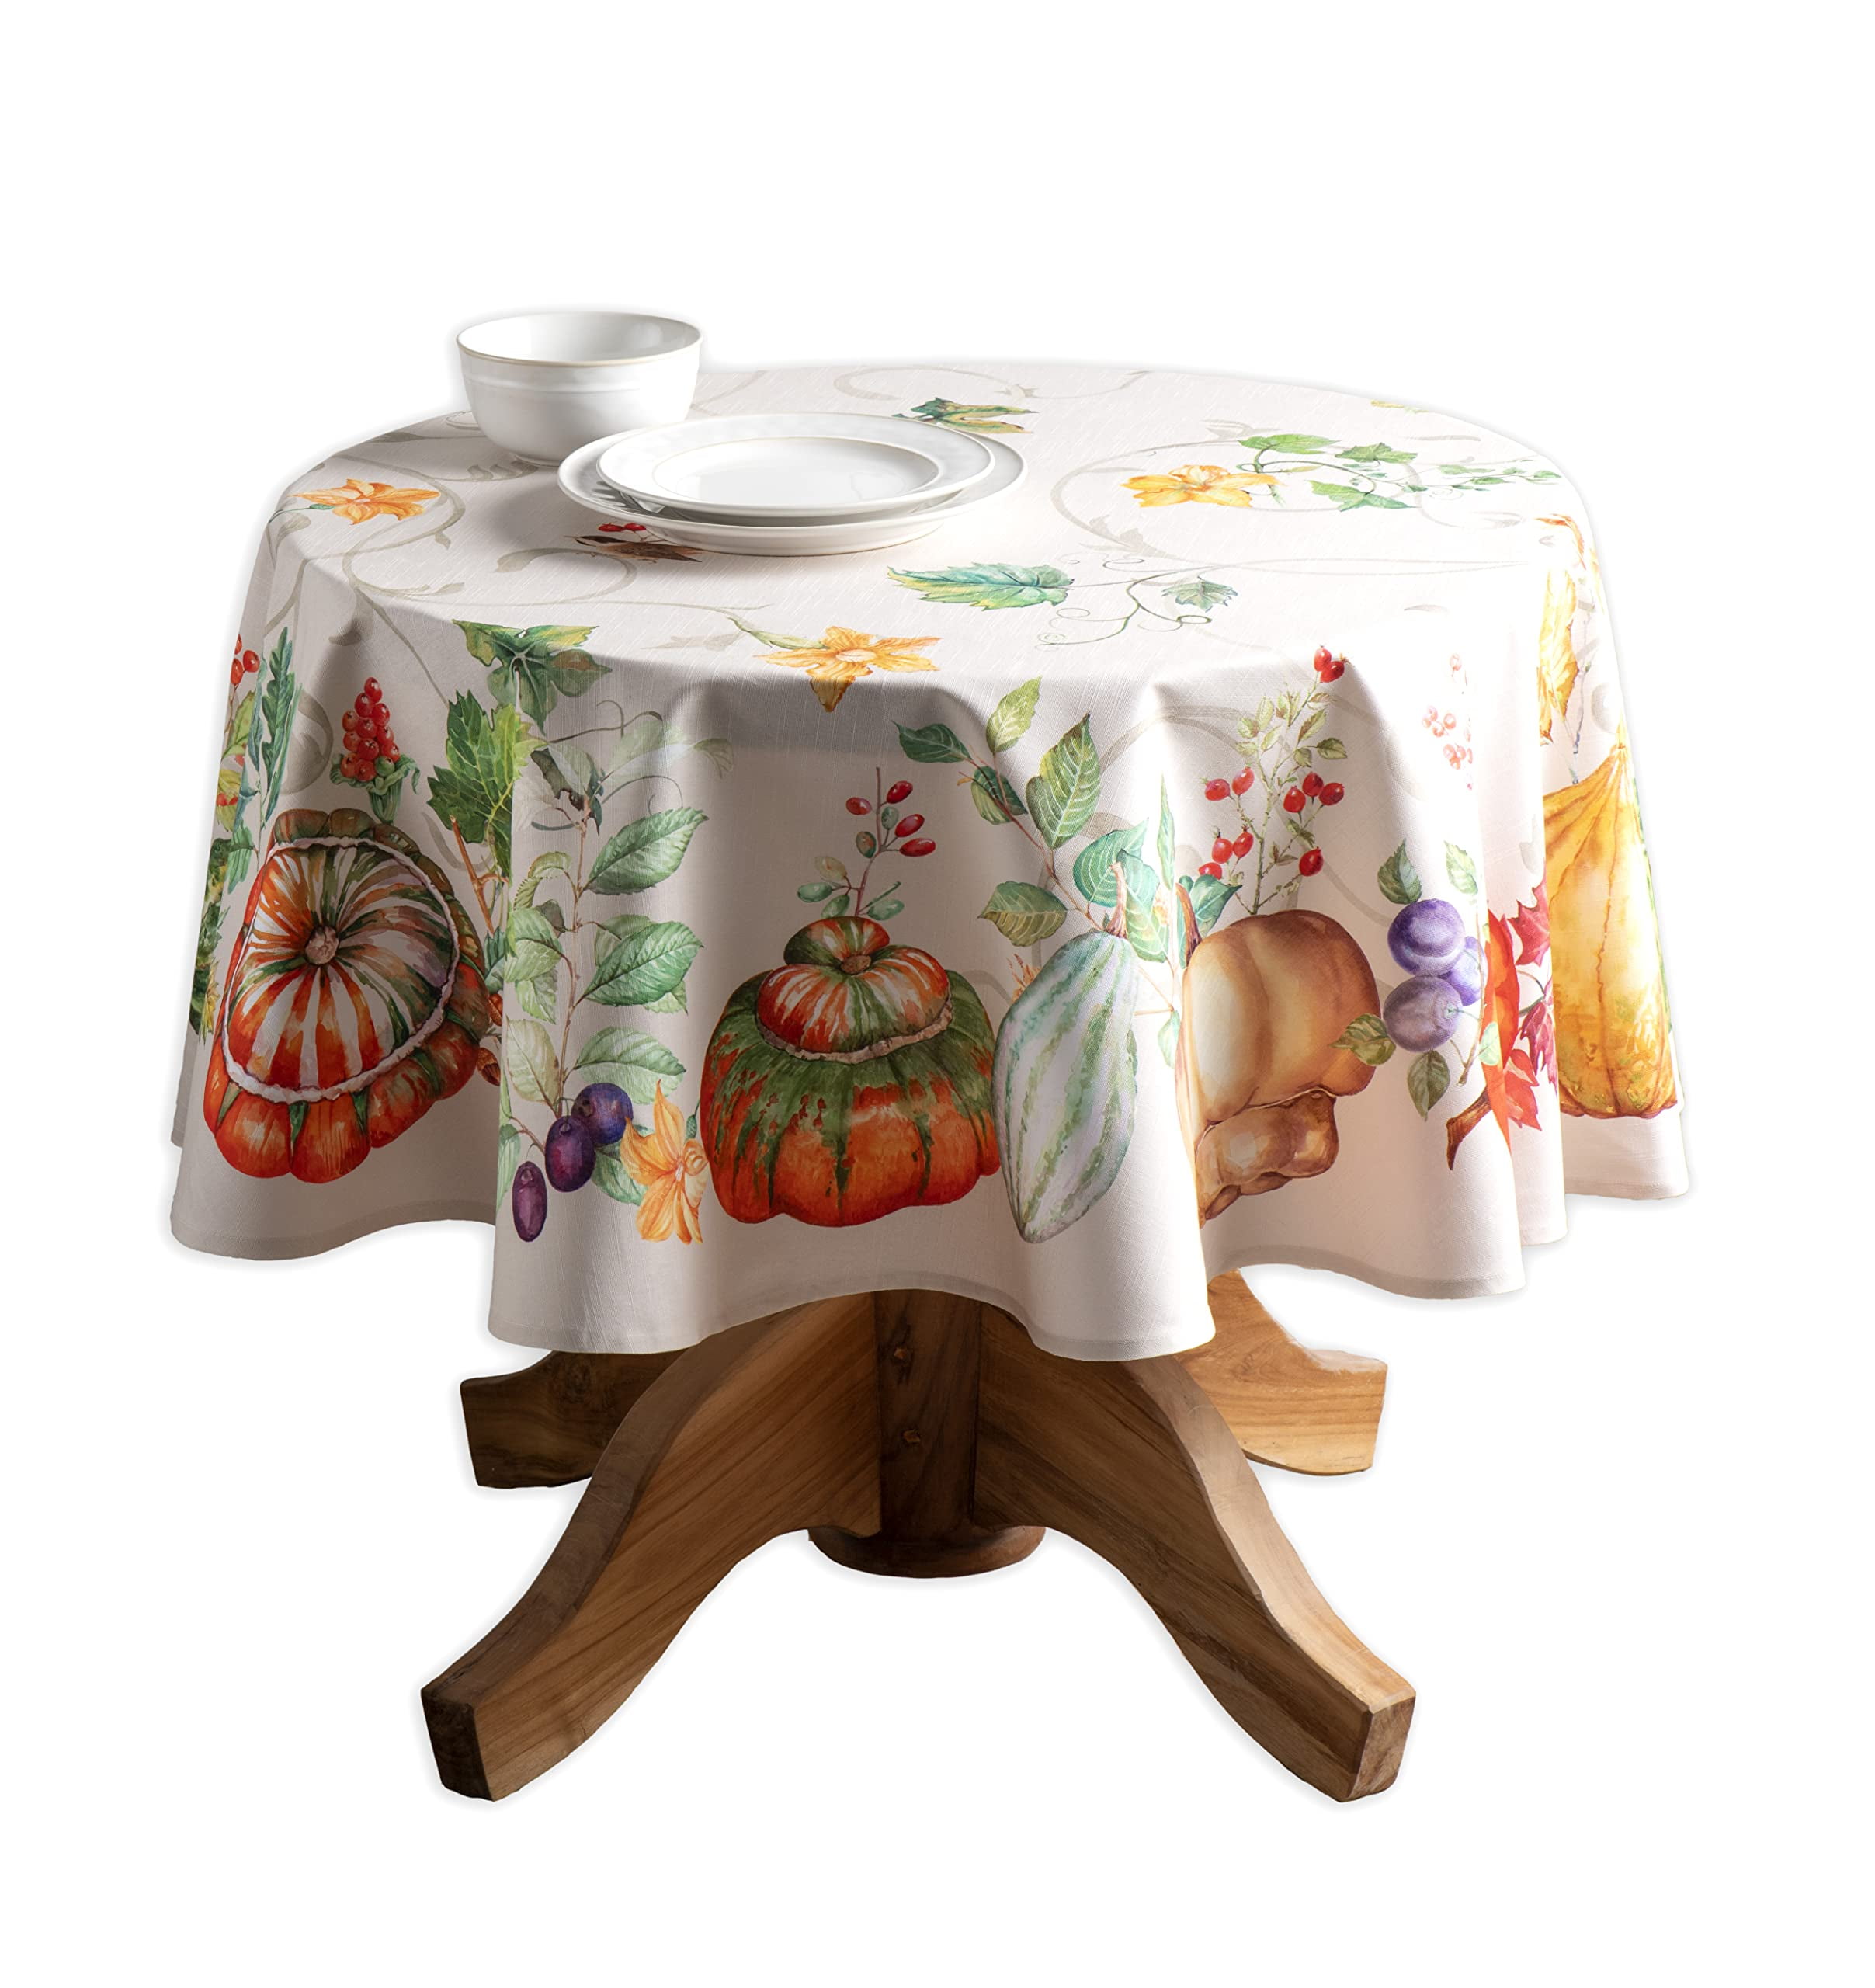 Maison d' Hermine Giving Thanks 100% CottonTablecloth for Kitchen Dining  Tabletop Decoration Parties Weddings (Round, 69 Inch Diameter) 